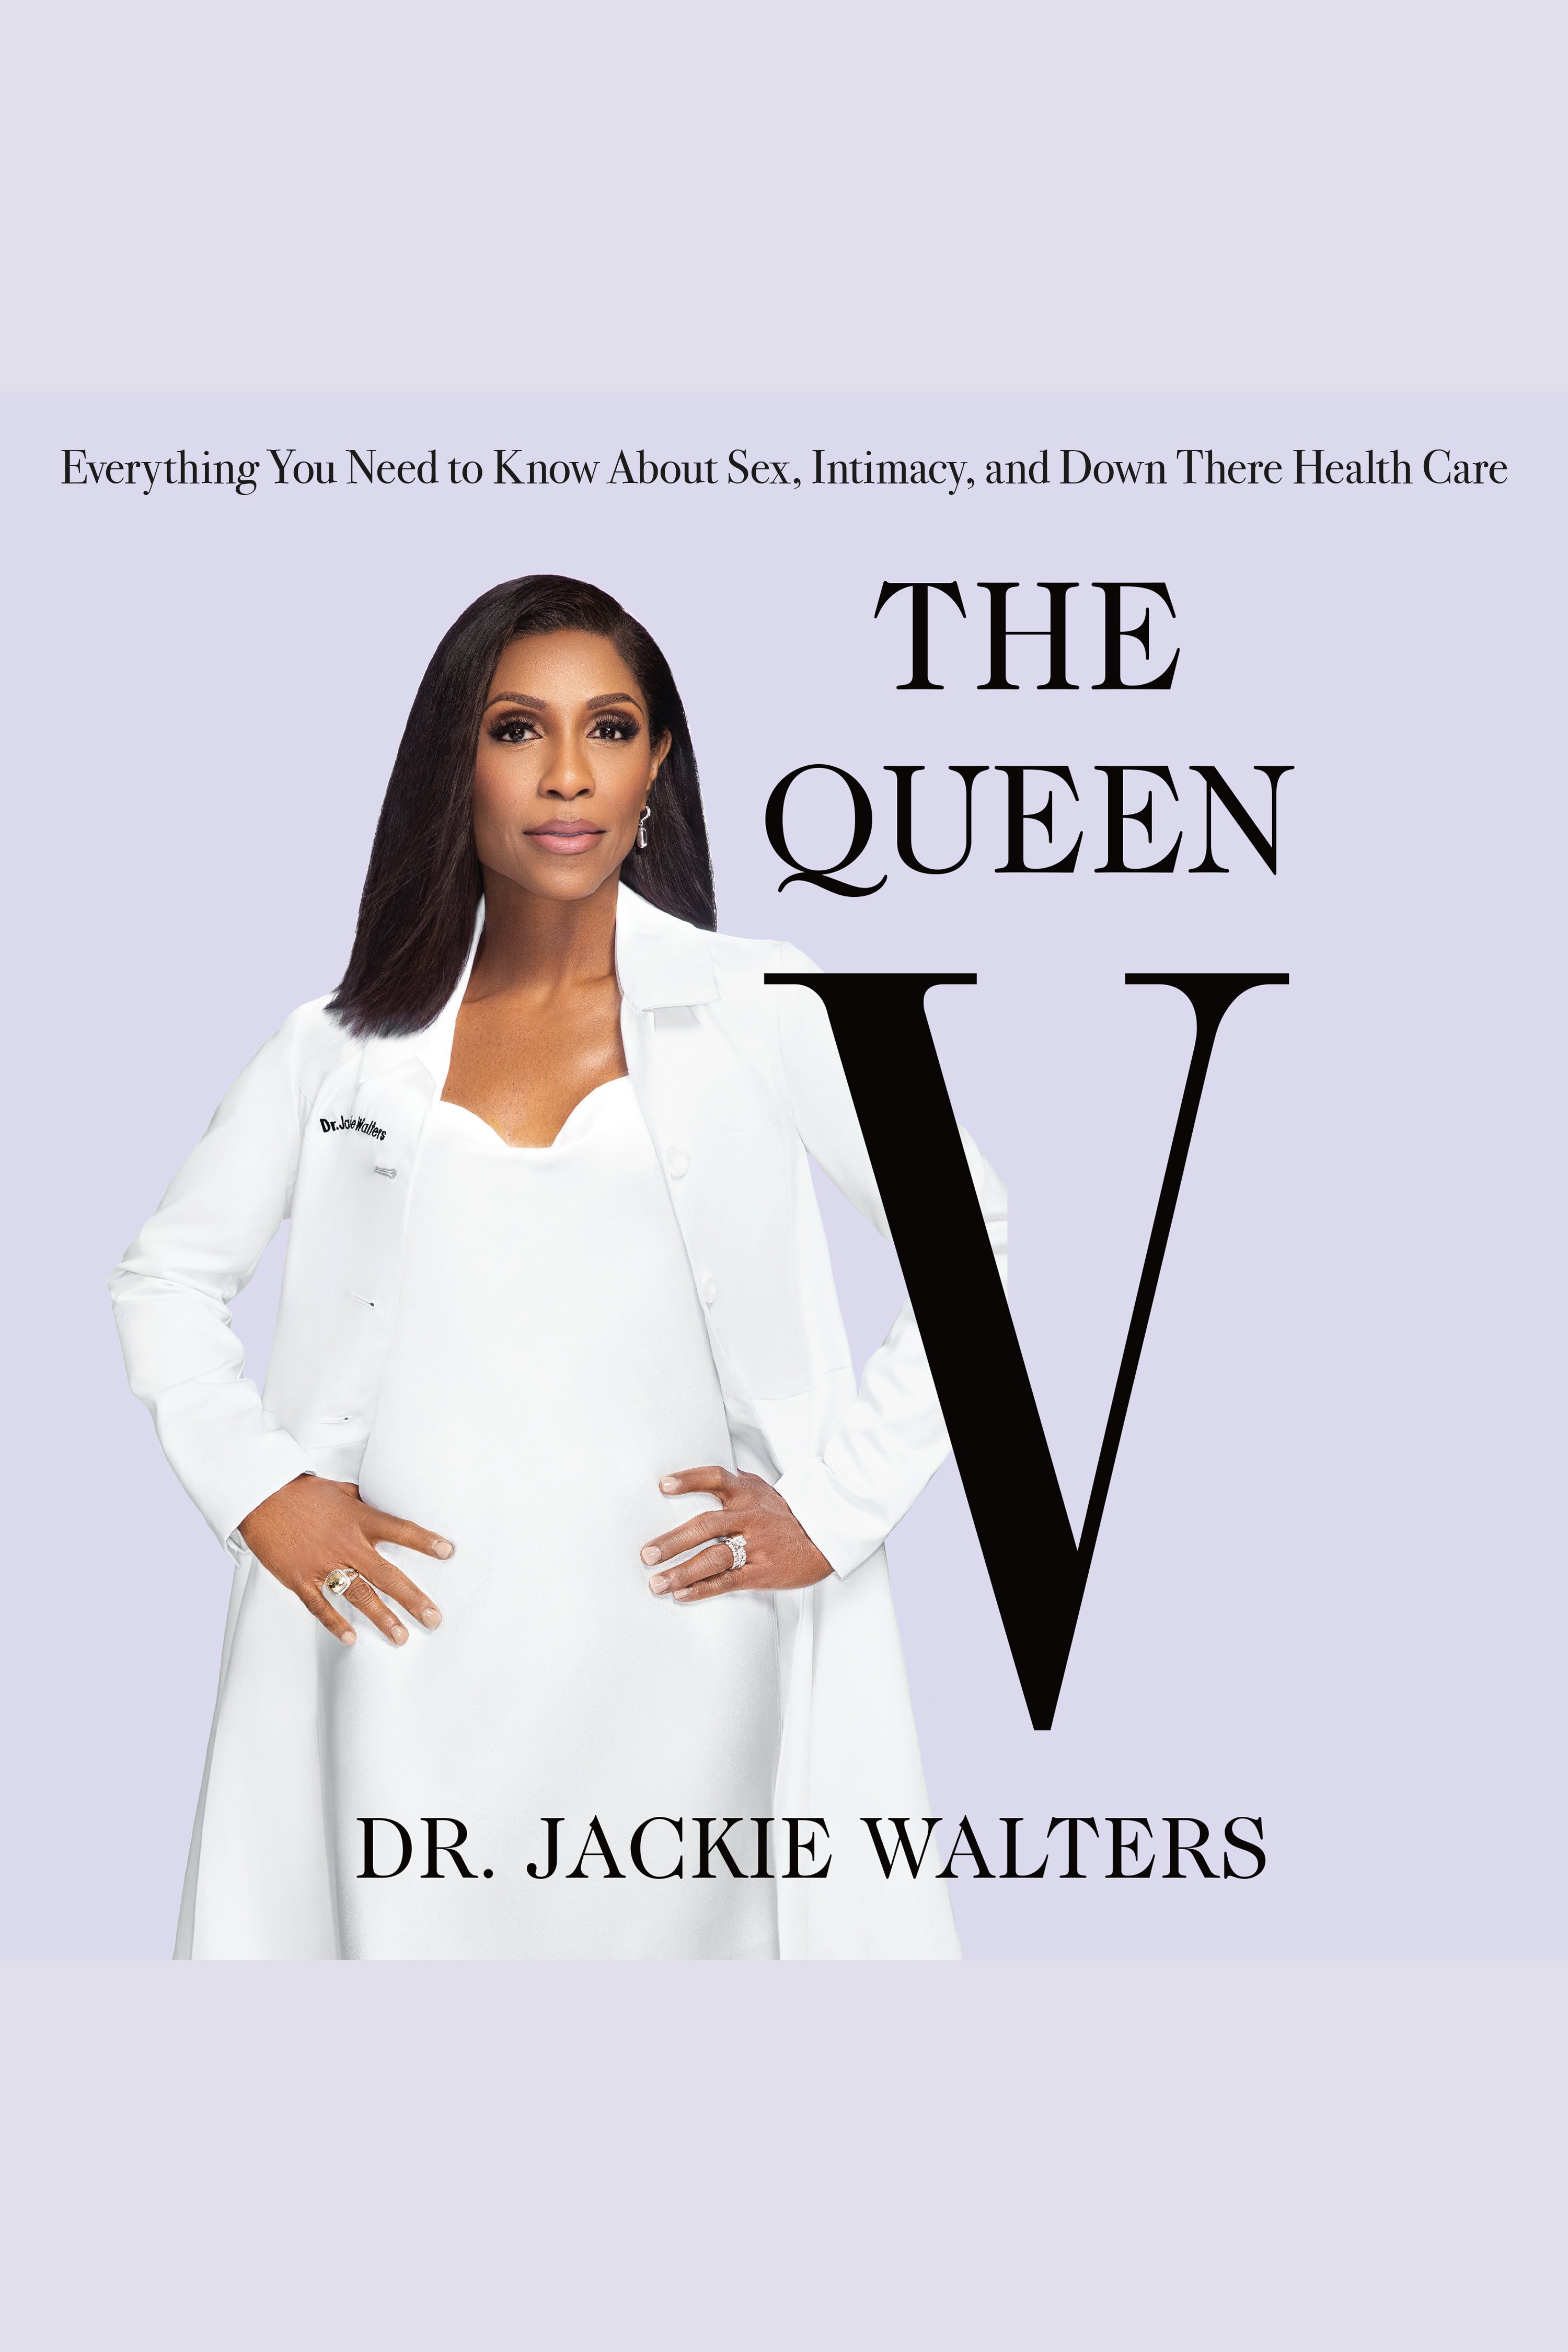 The Queen V everything you need to know about intimacy, sex, and down there healthcare cover image